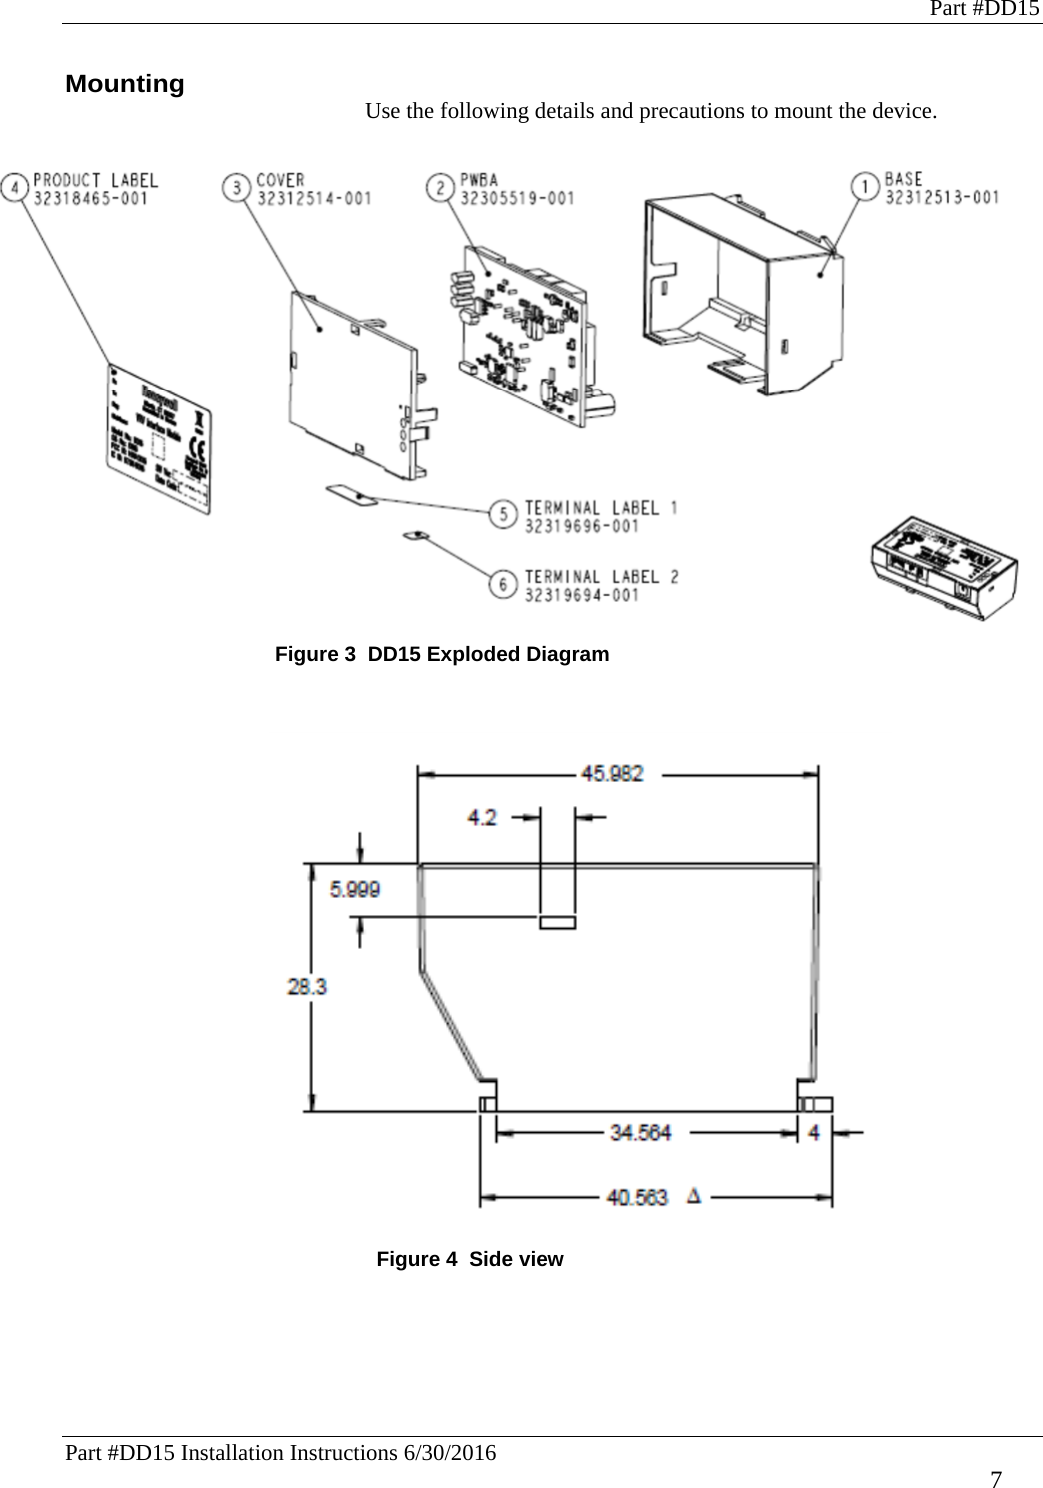 Part #DD15 Part #DD15 Installation Instructions 6/30/2016     7 Mounting Use the following details and precautions to mount the device.    Figure 3  DD15 Exploded Diagram     Figure 4  Side view 